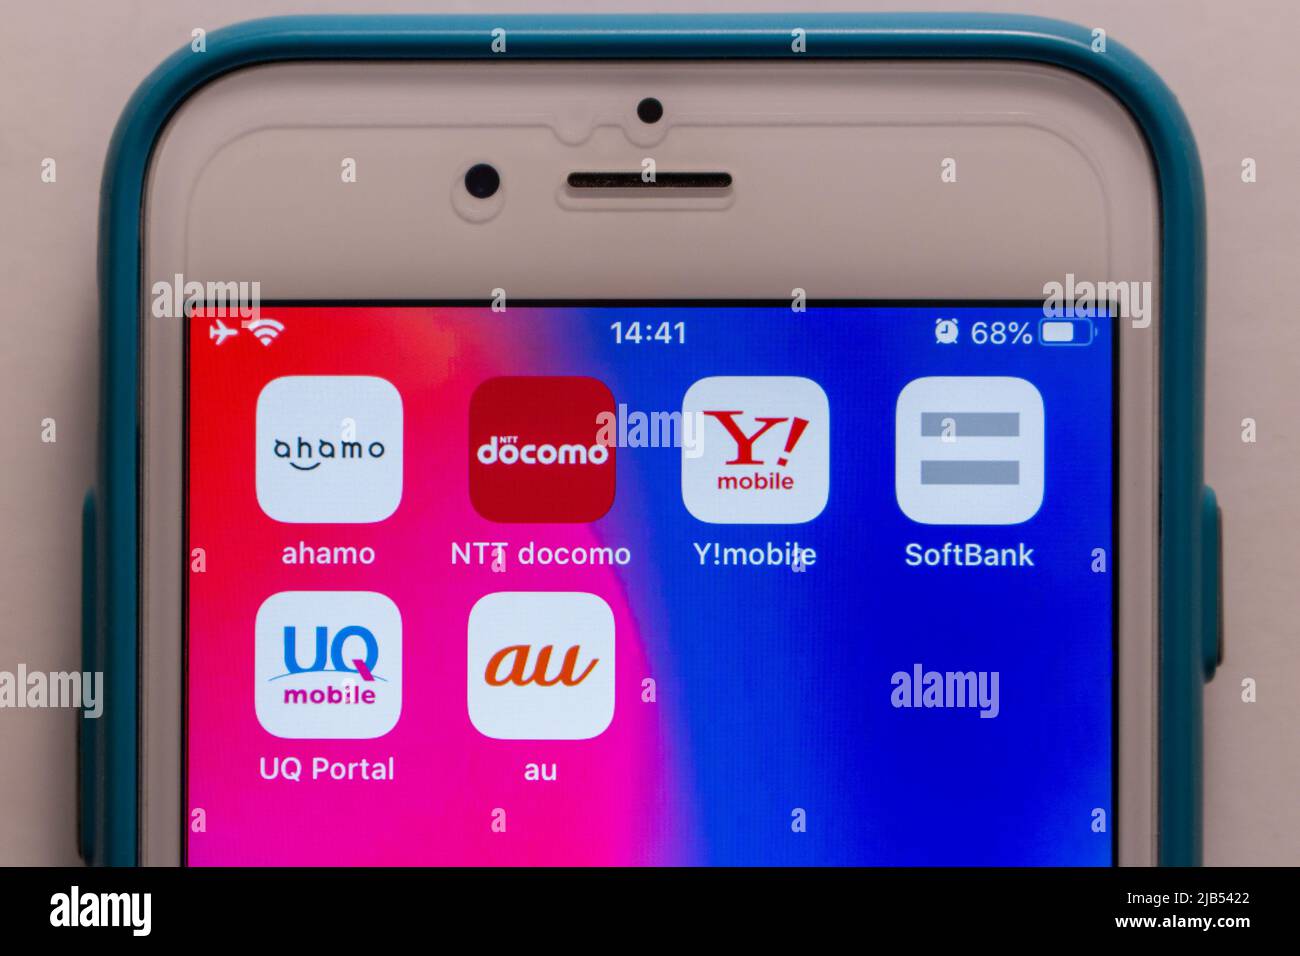 3 giant mobile carriers in Japan (au by KDDI, NTT docomo and SoftBank) with their subsidiary mobile brands Ahamo, Y!mobile, UQ Mobile on iPhone. Stock Photo